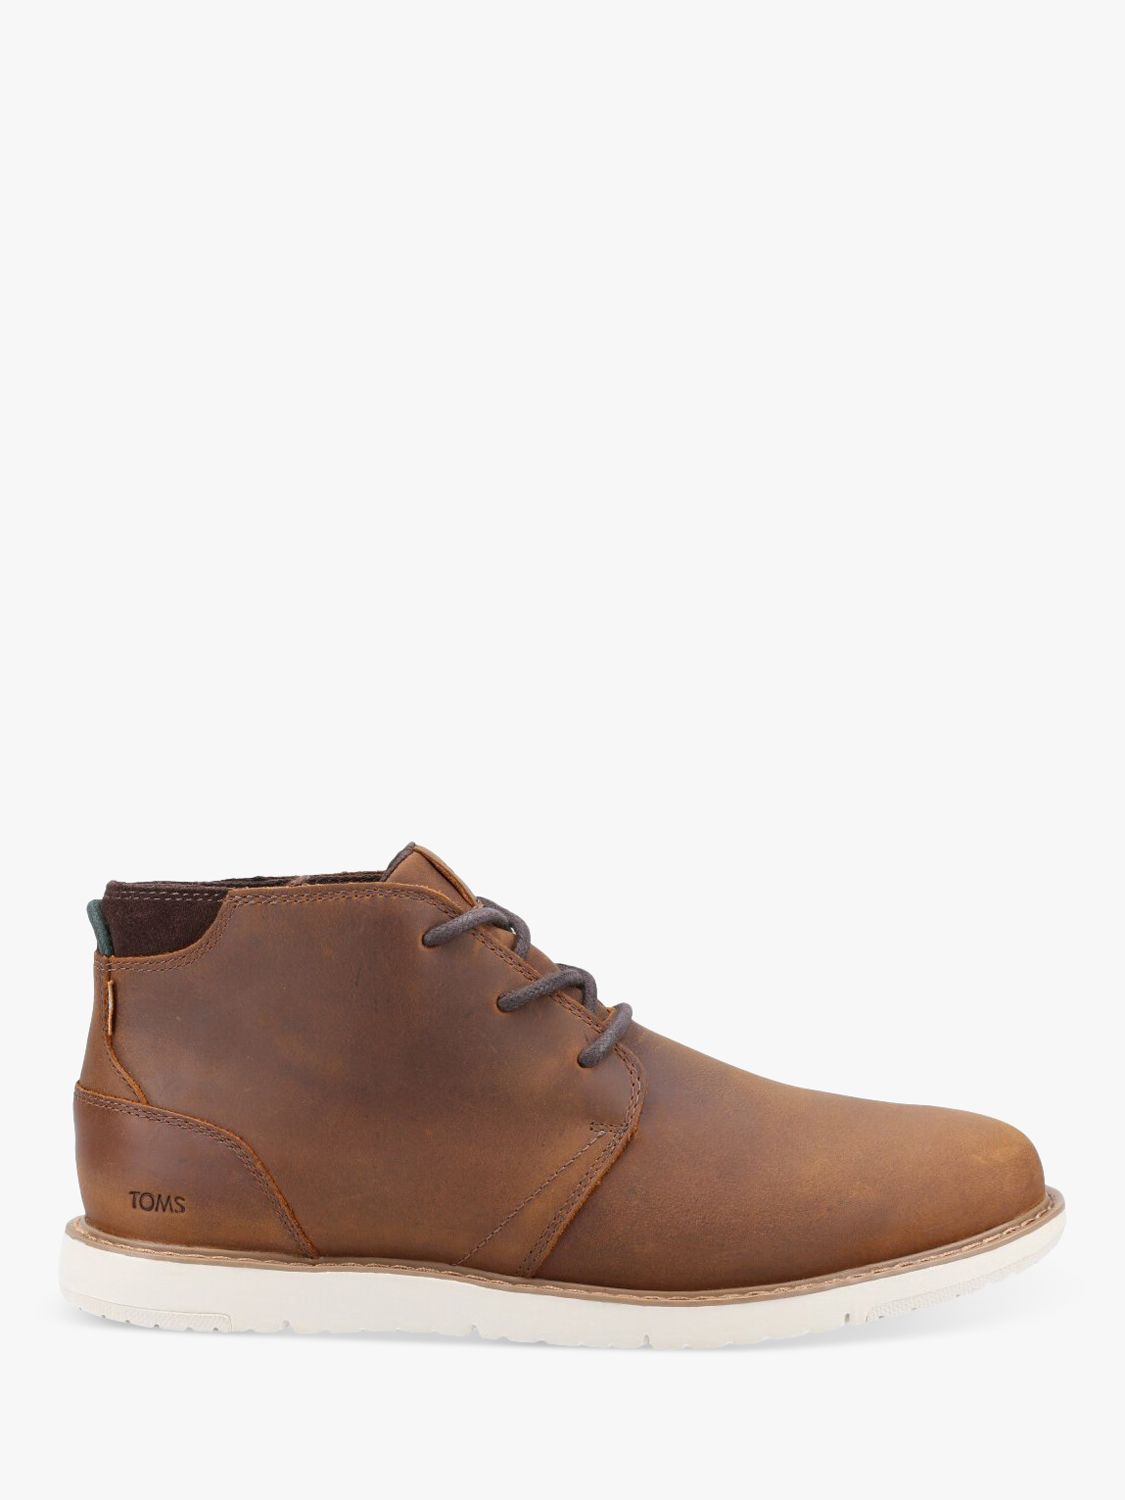 TOMS Navi Water Resistant Leather Chukka Boots, Brown